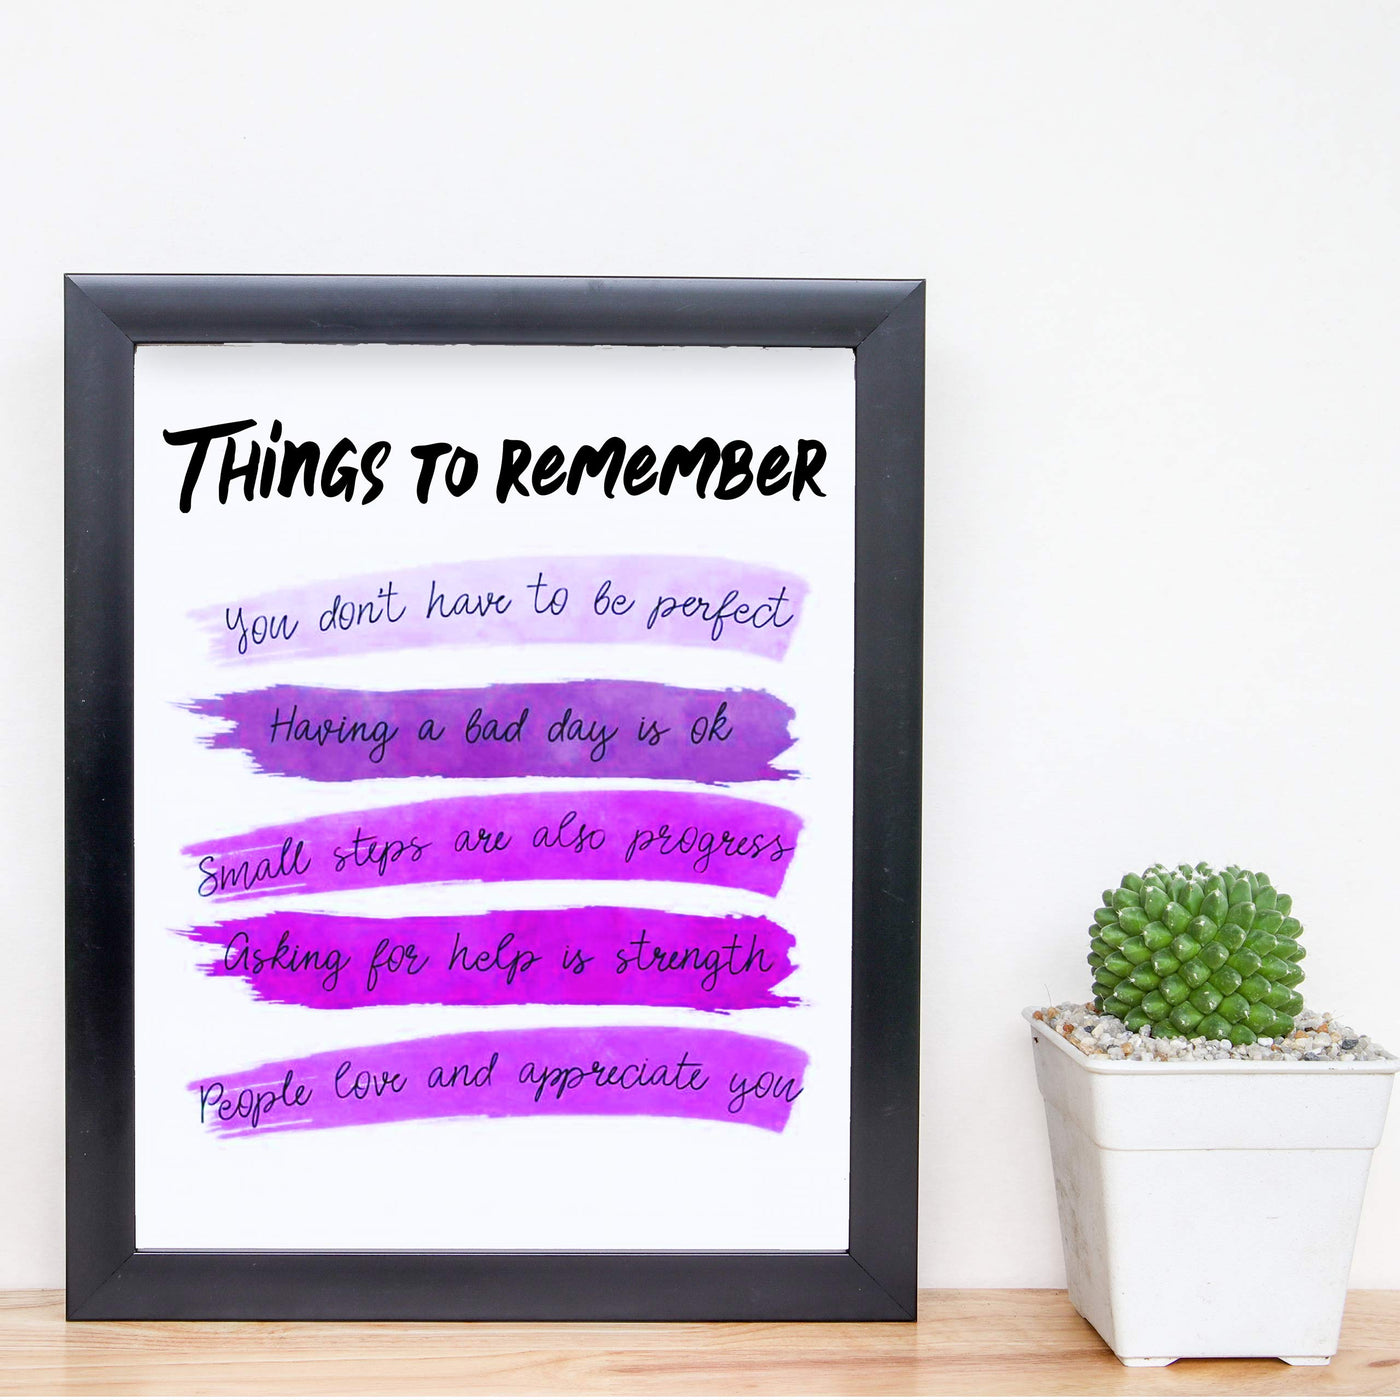 Things To Remember To Make Life Better-Positive Inspirational Quotes Wall Decor-Watercolor Art Women, Girls, Teens, Daughter, BFF-Purple Motivational Wall Art Poster for Home, Bedroom, Bathroom Art.